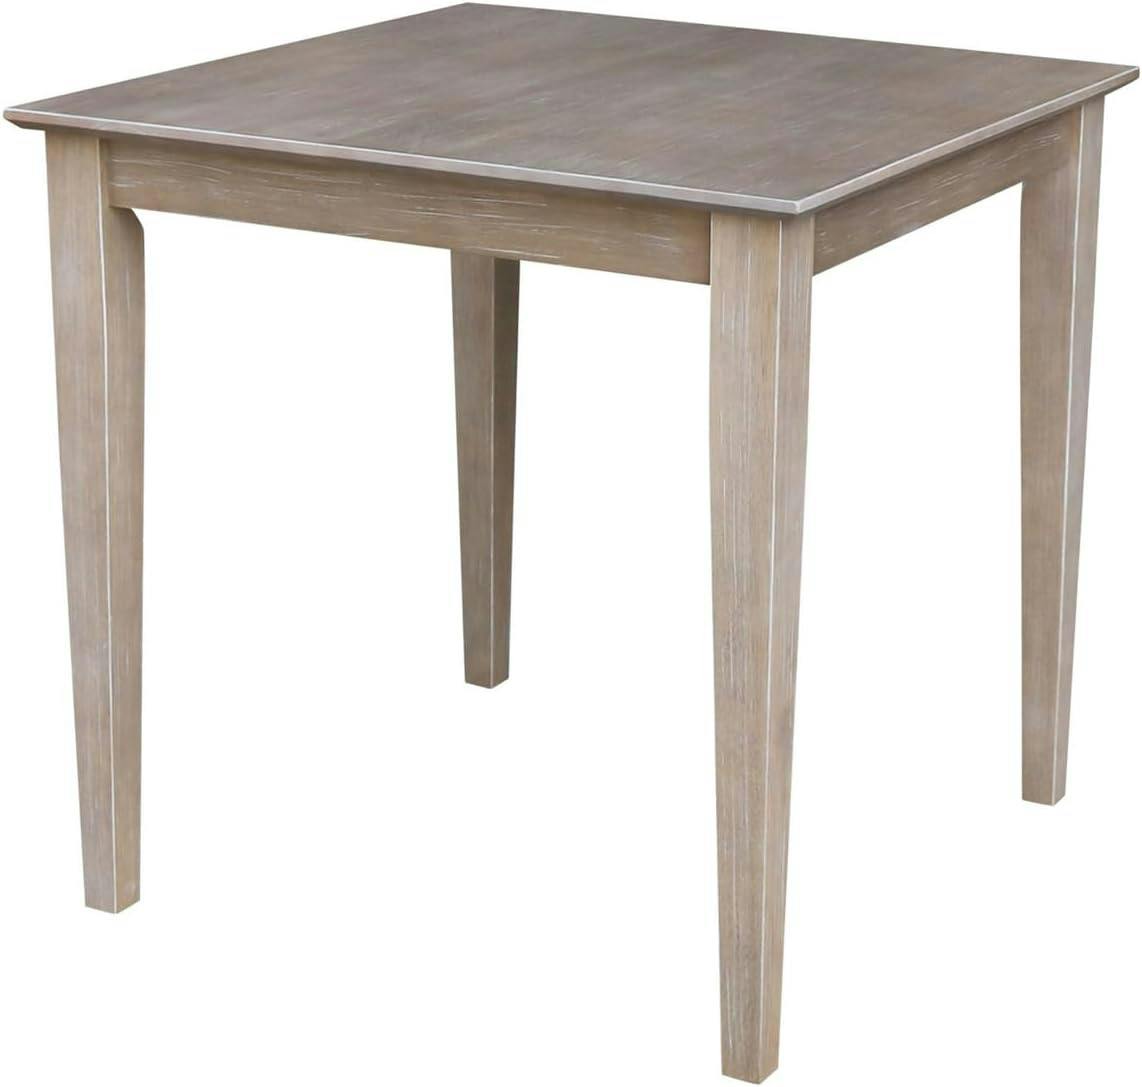 Transitional Solid Wood 30" Square Dining Table in Washed Gray